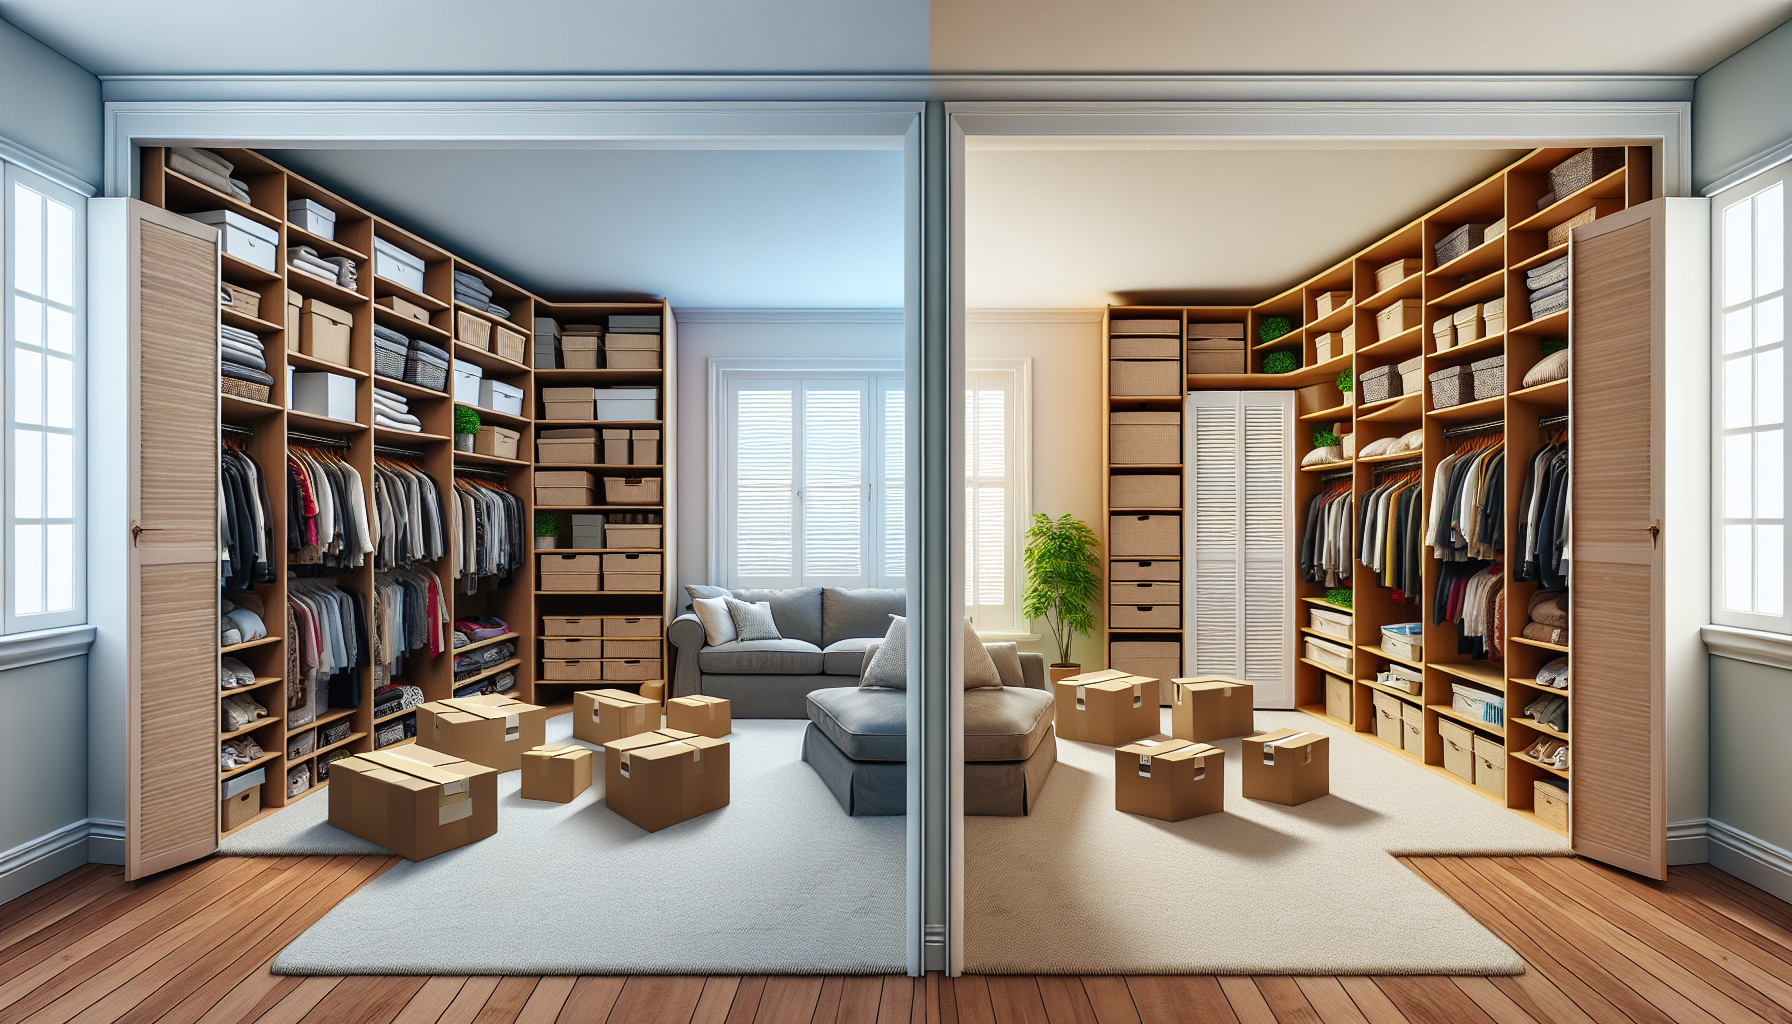 Discover the benefits of removing closet doors to maximize home space